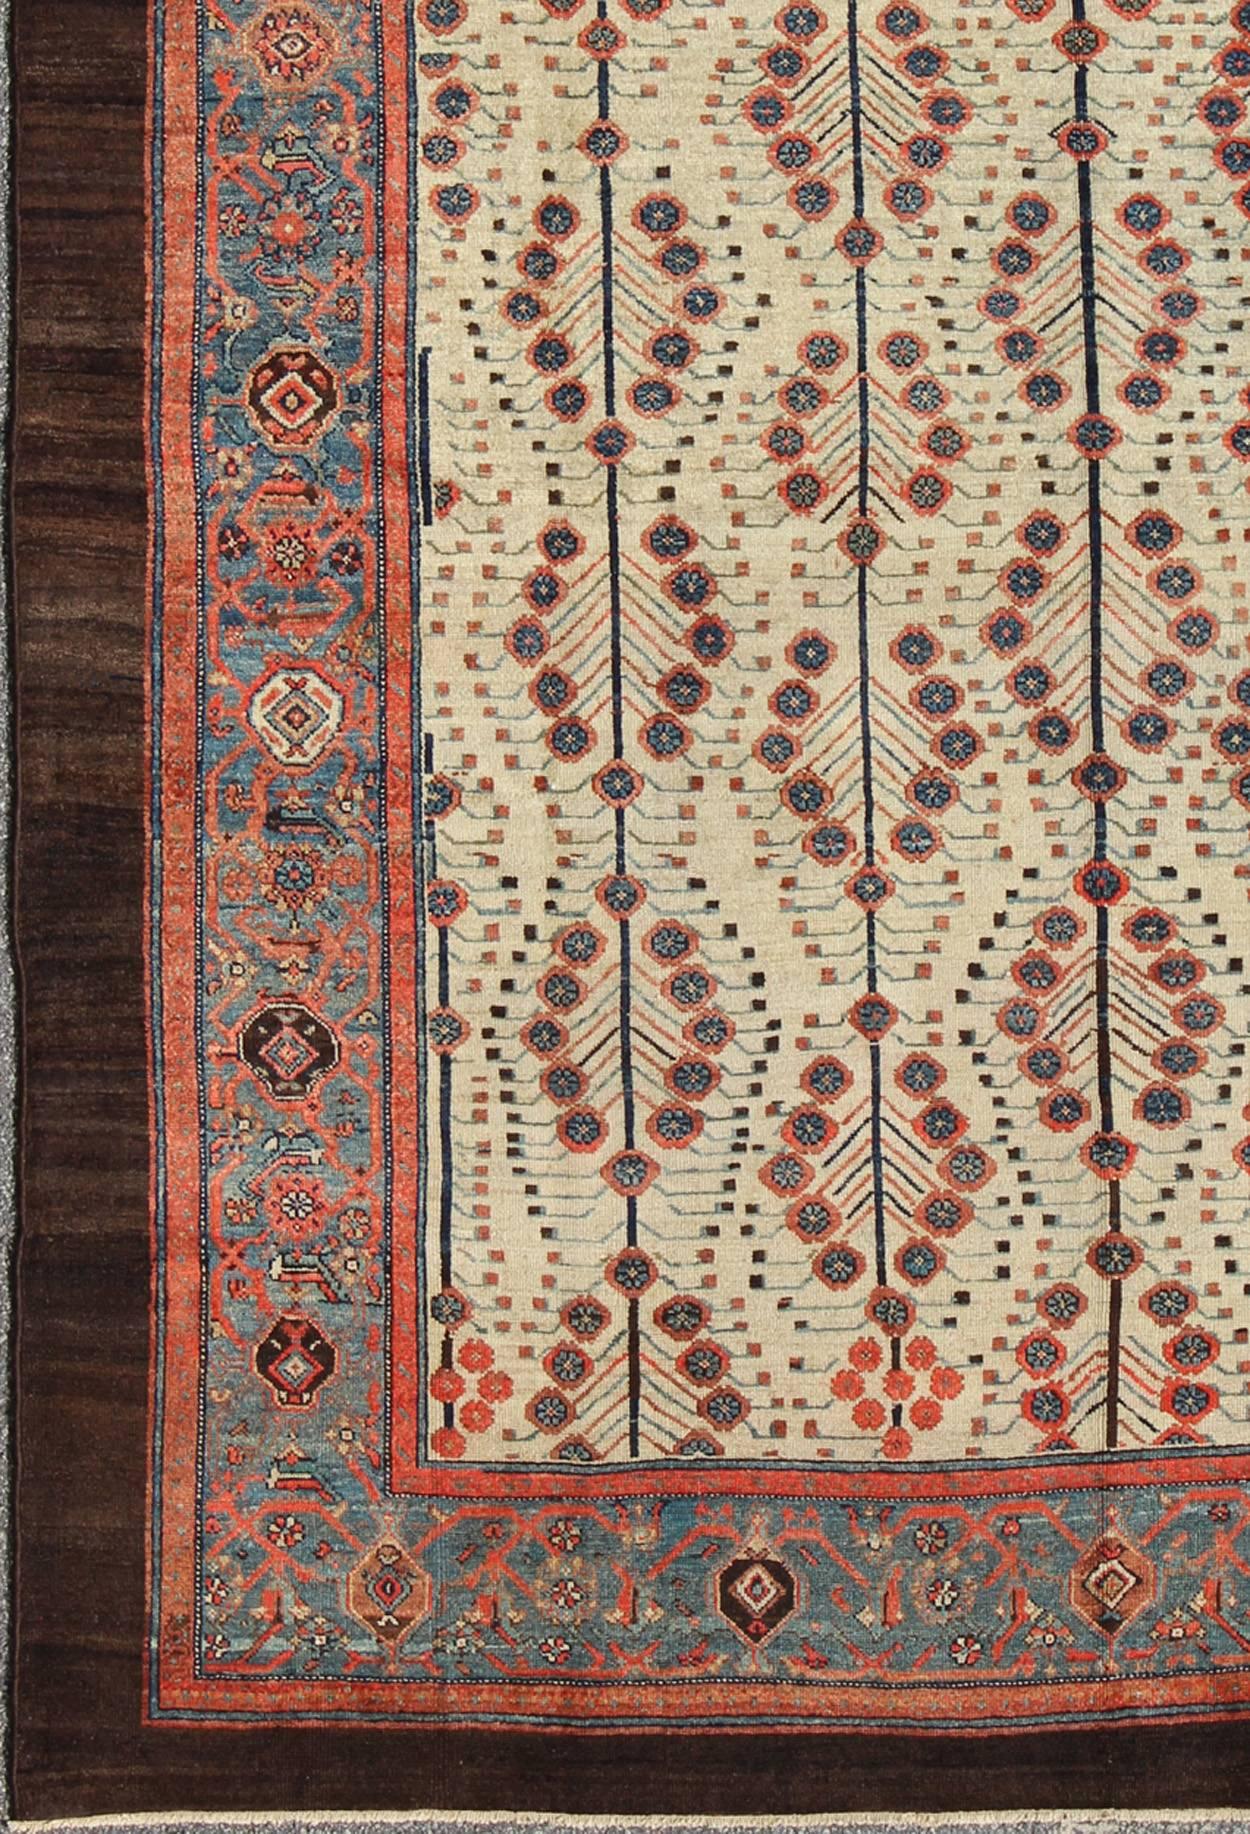 Antique Persian Serab Rug with a Bakhshaish Tree Design in Cream, Red, Blue and Brown Colors.
This amazing antique Persian Serab/Bakhshaish rug is a masterful example of the Serab rugs of the late 19th Century. Early Serab rugs are prized for their